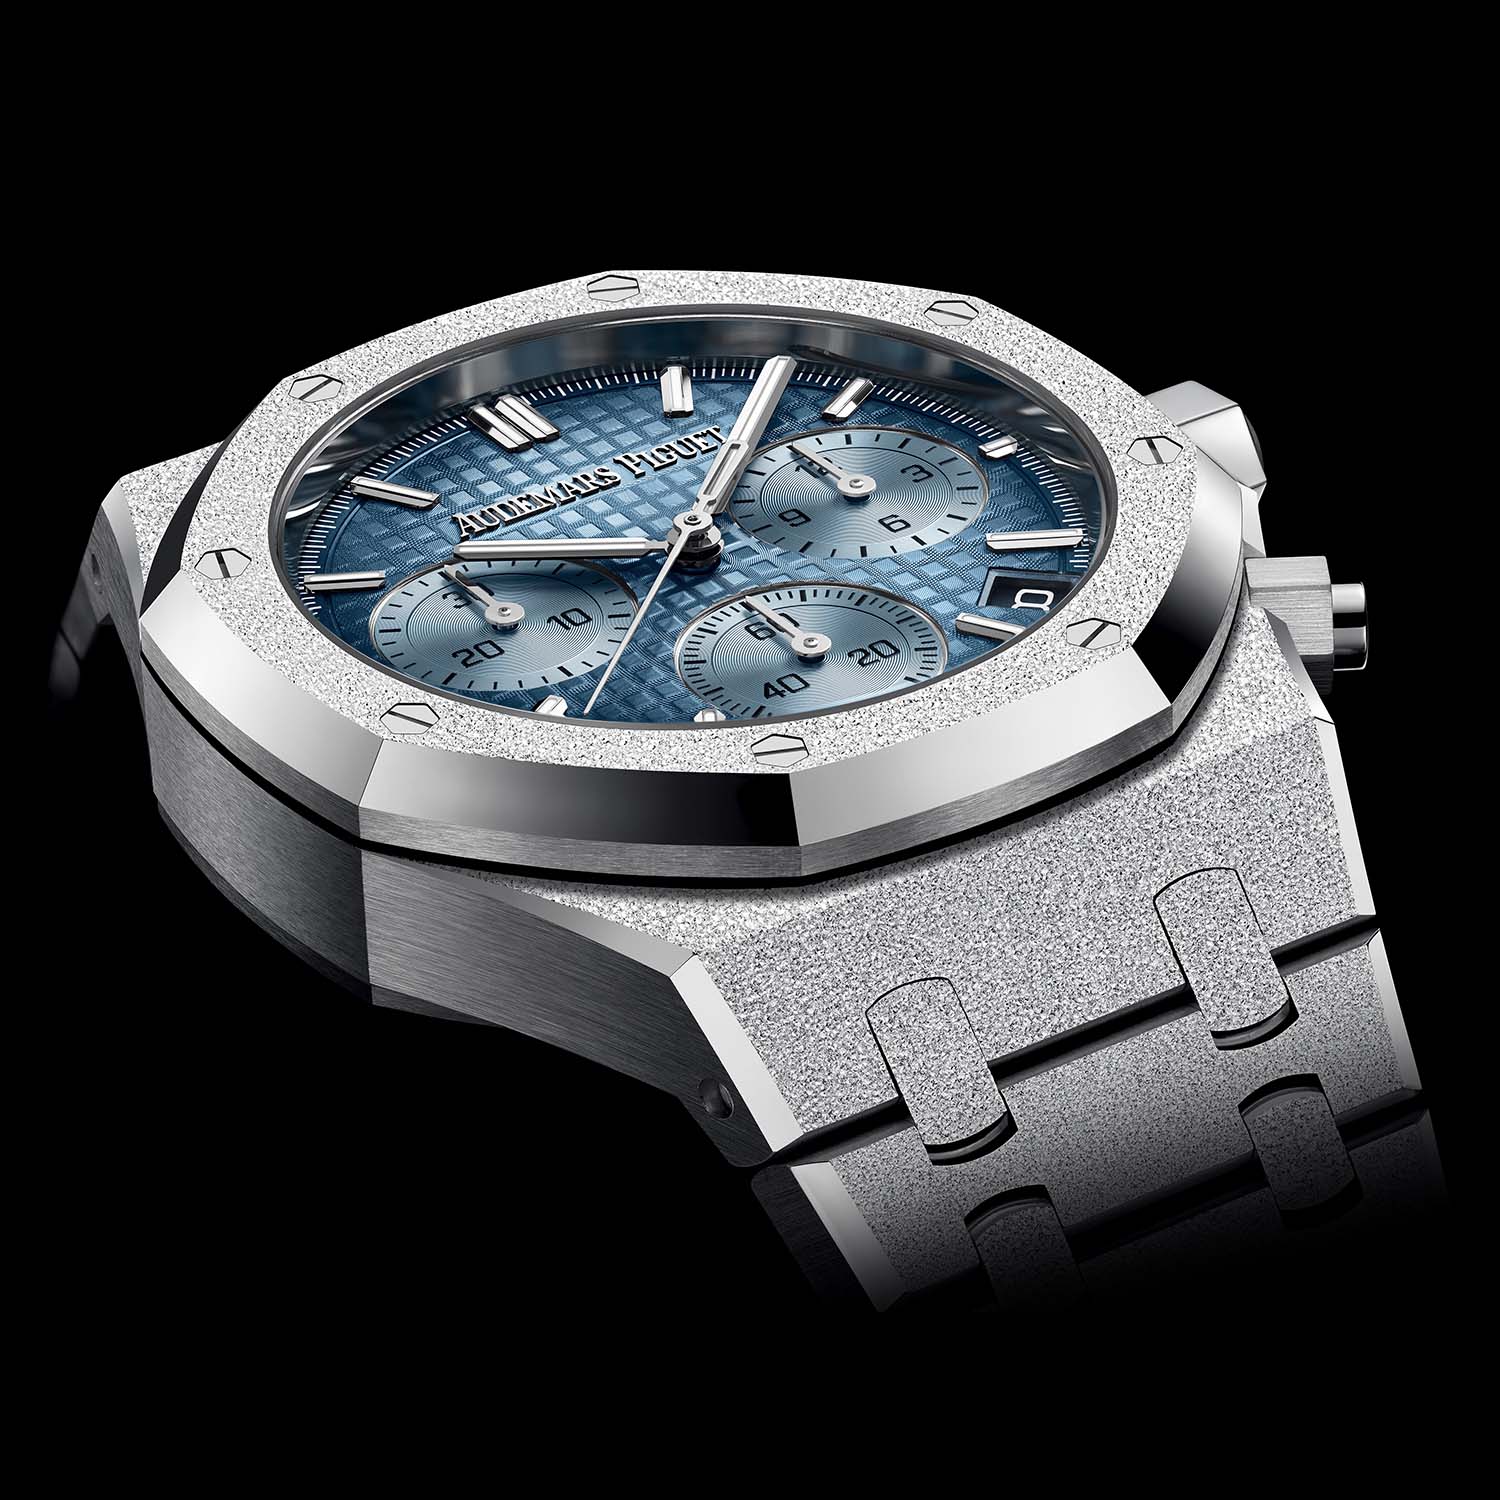 Audemars Piguet Royal Oak Selwinding Chronograph 41mm Frosted White Gold Smoked Light Blue Dial 26240BC